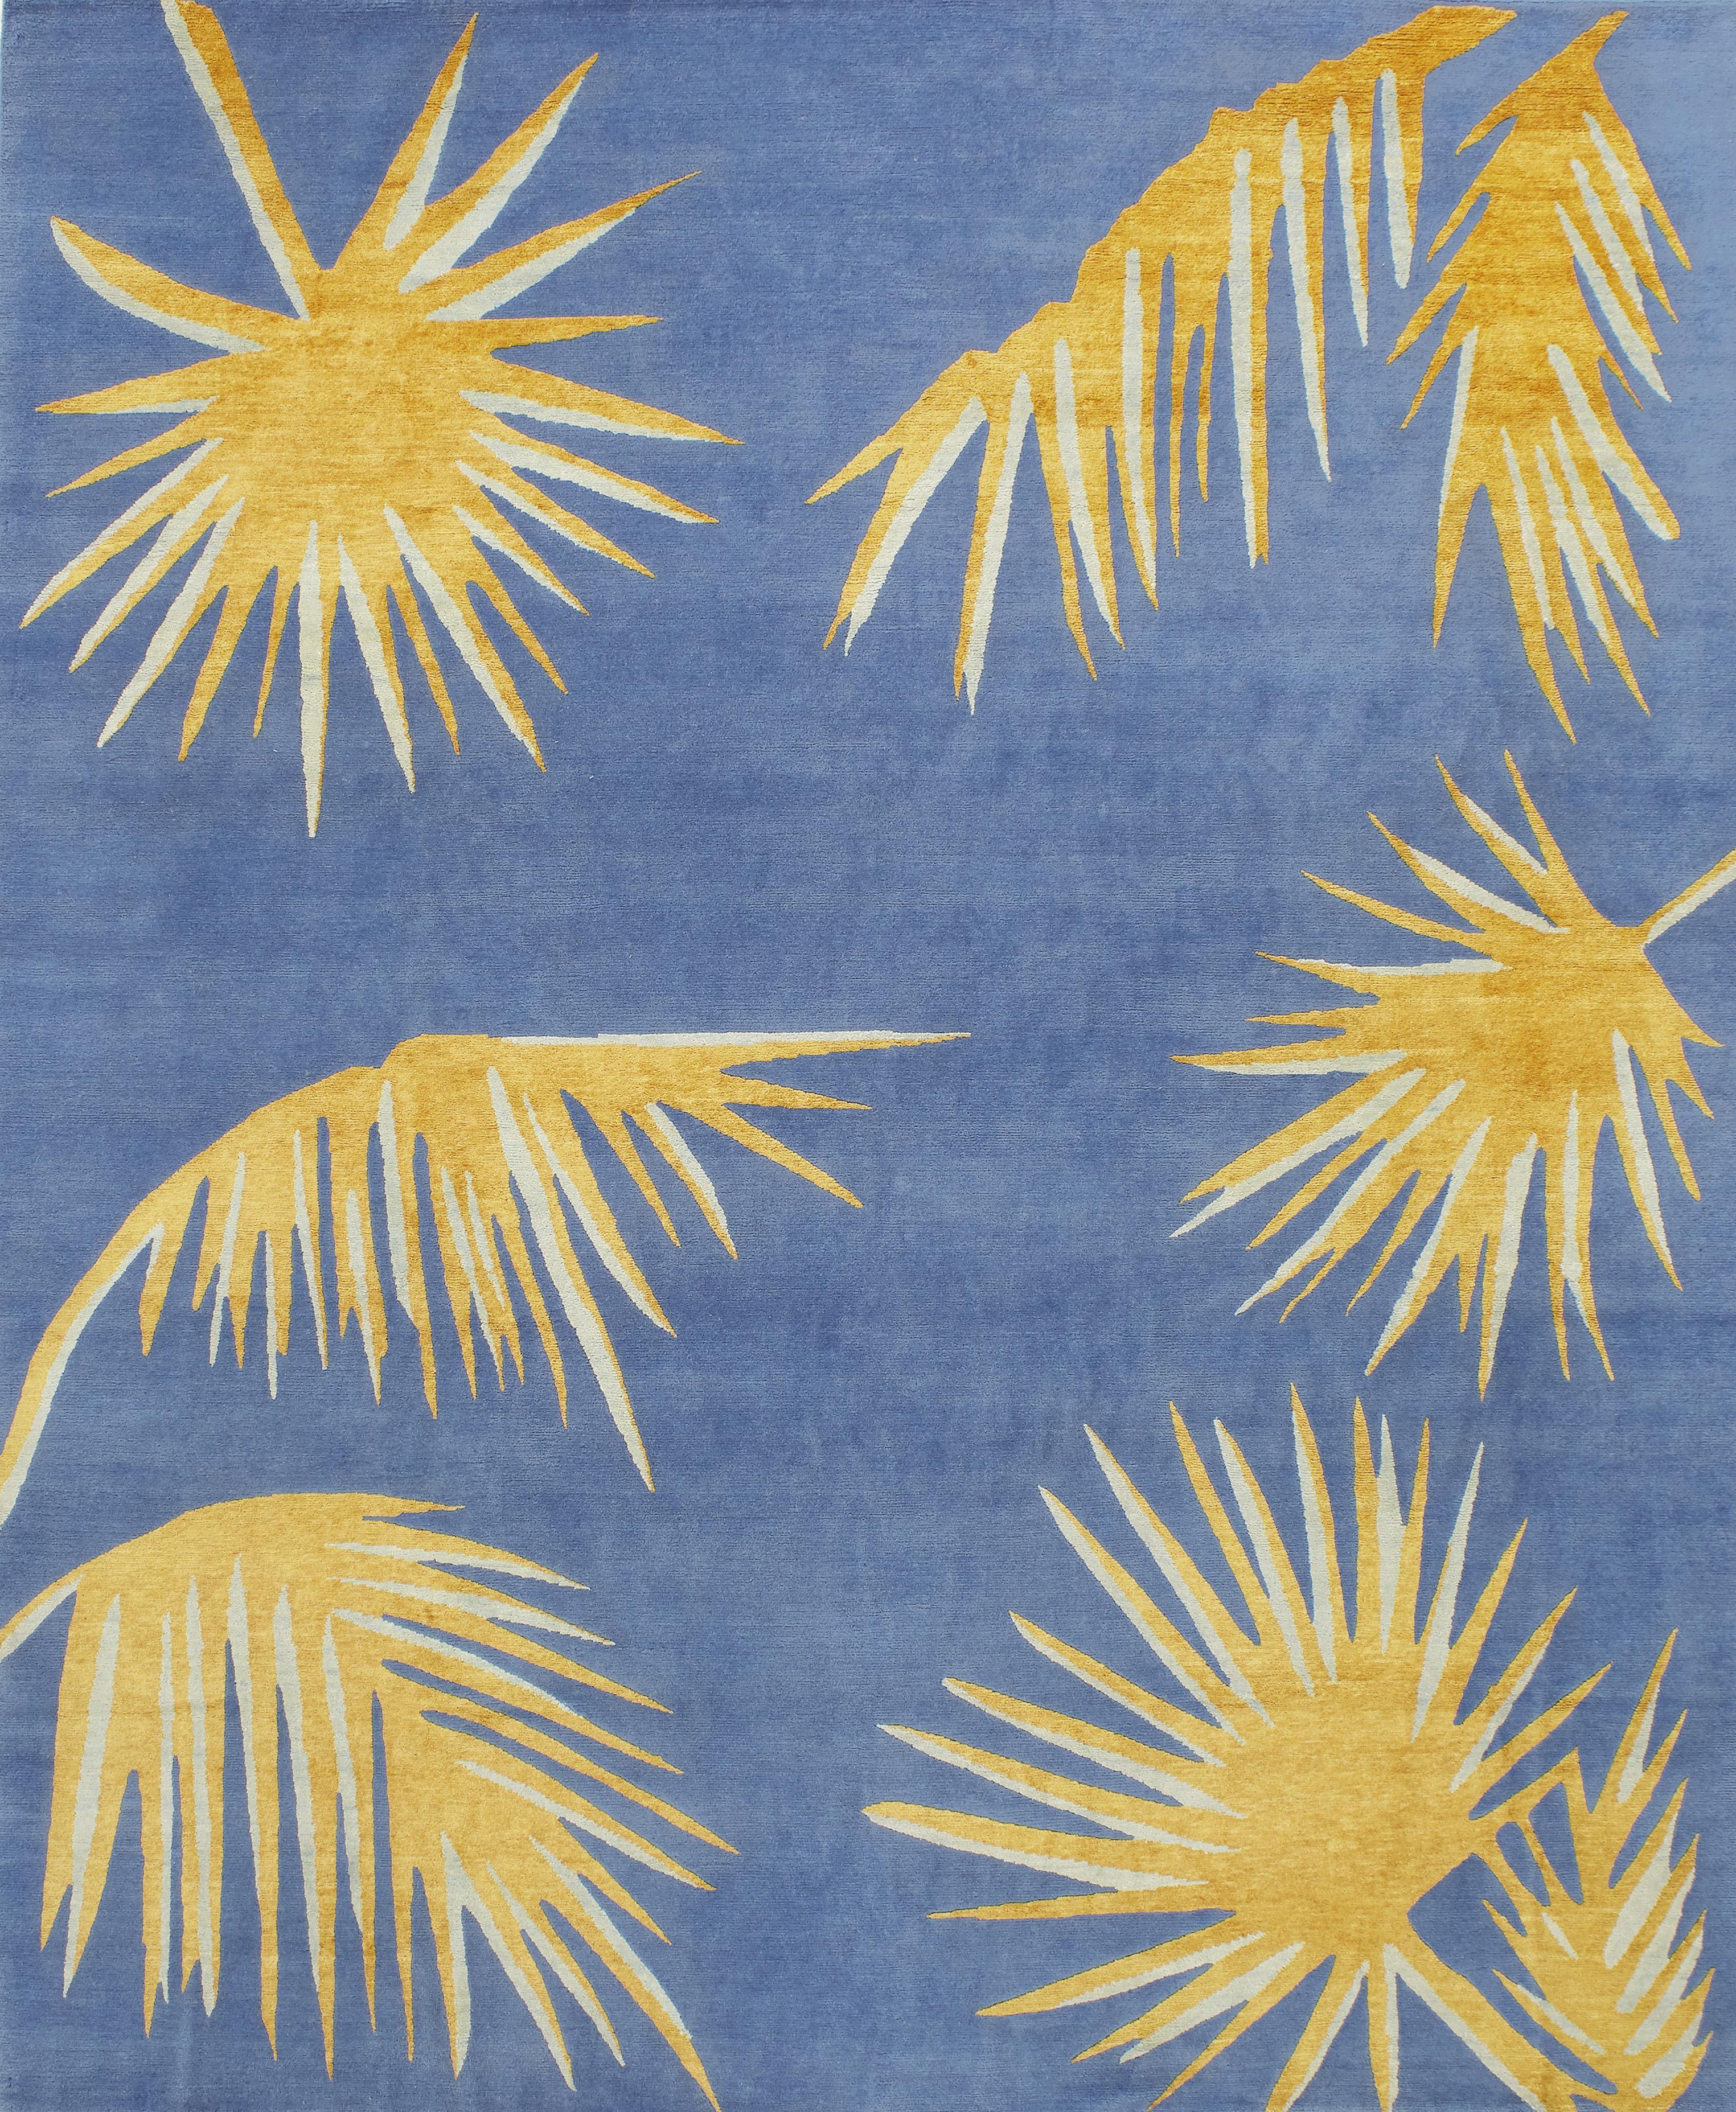 This exquisite rug was entirely hand knotted using Tibetan wool, which is highly durable and soft. The details are in Fine silk, to add a different texture to the piece. In it, pale-blue is the background for a set of striking golden-yellow palm